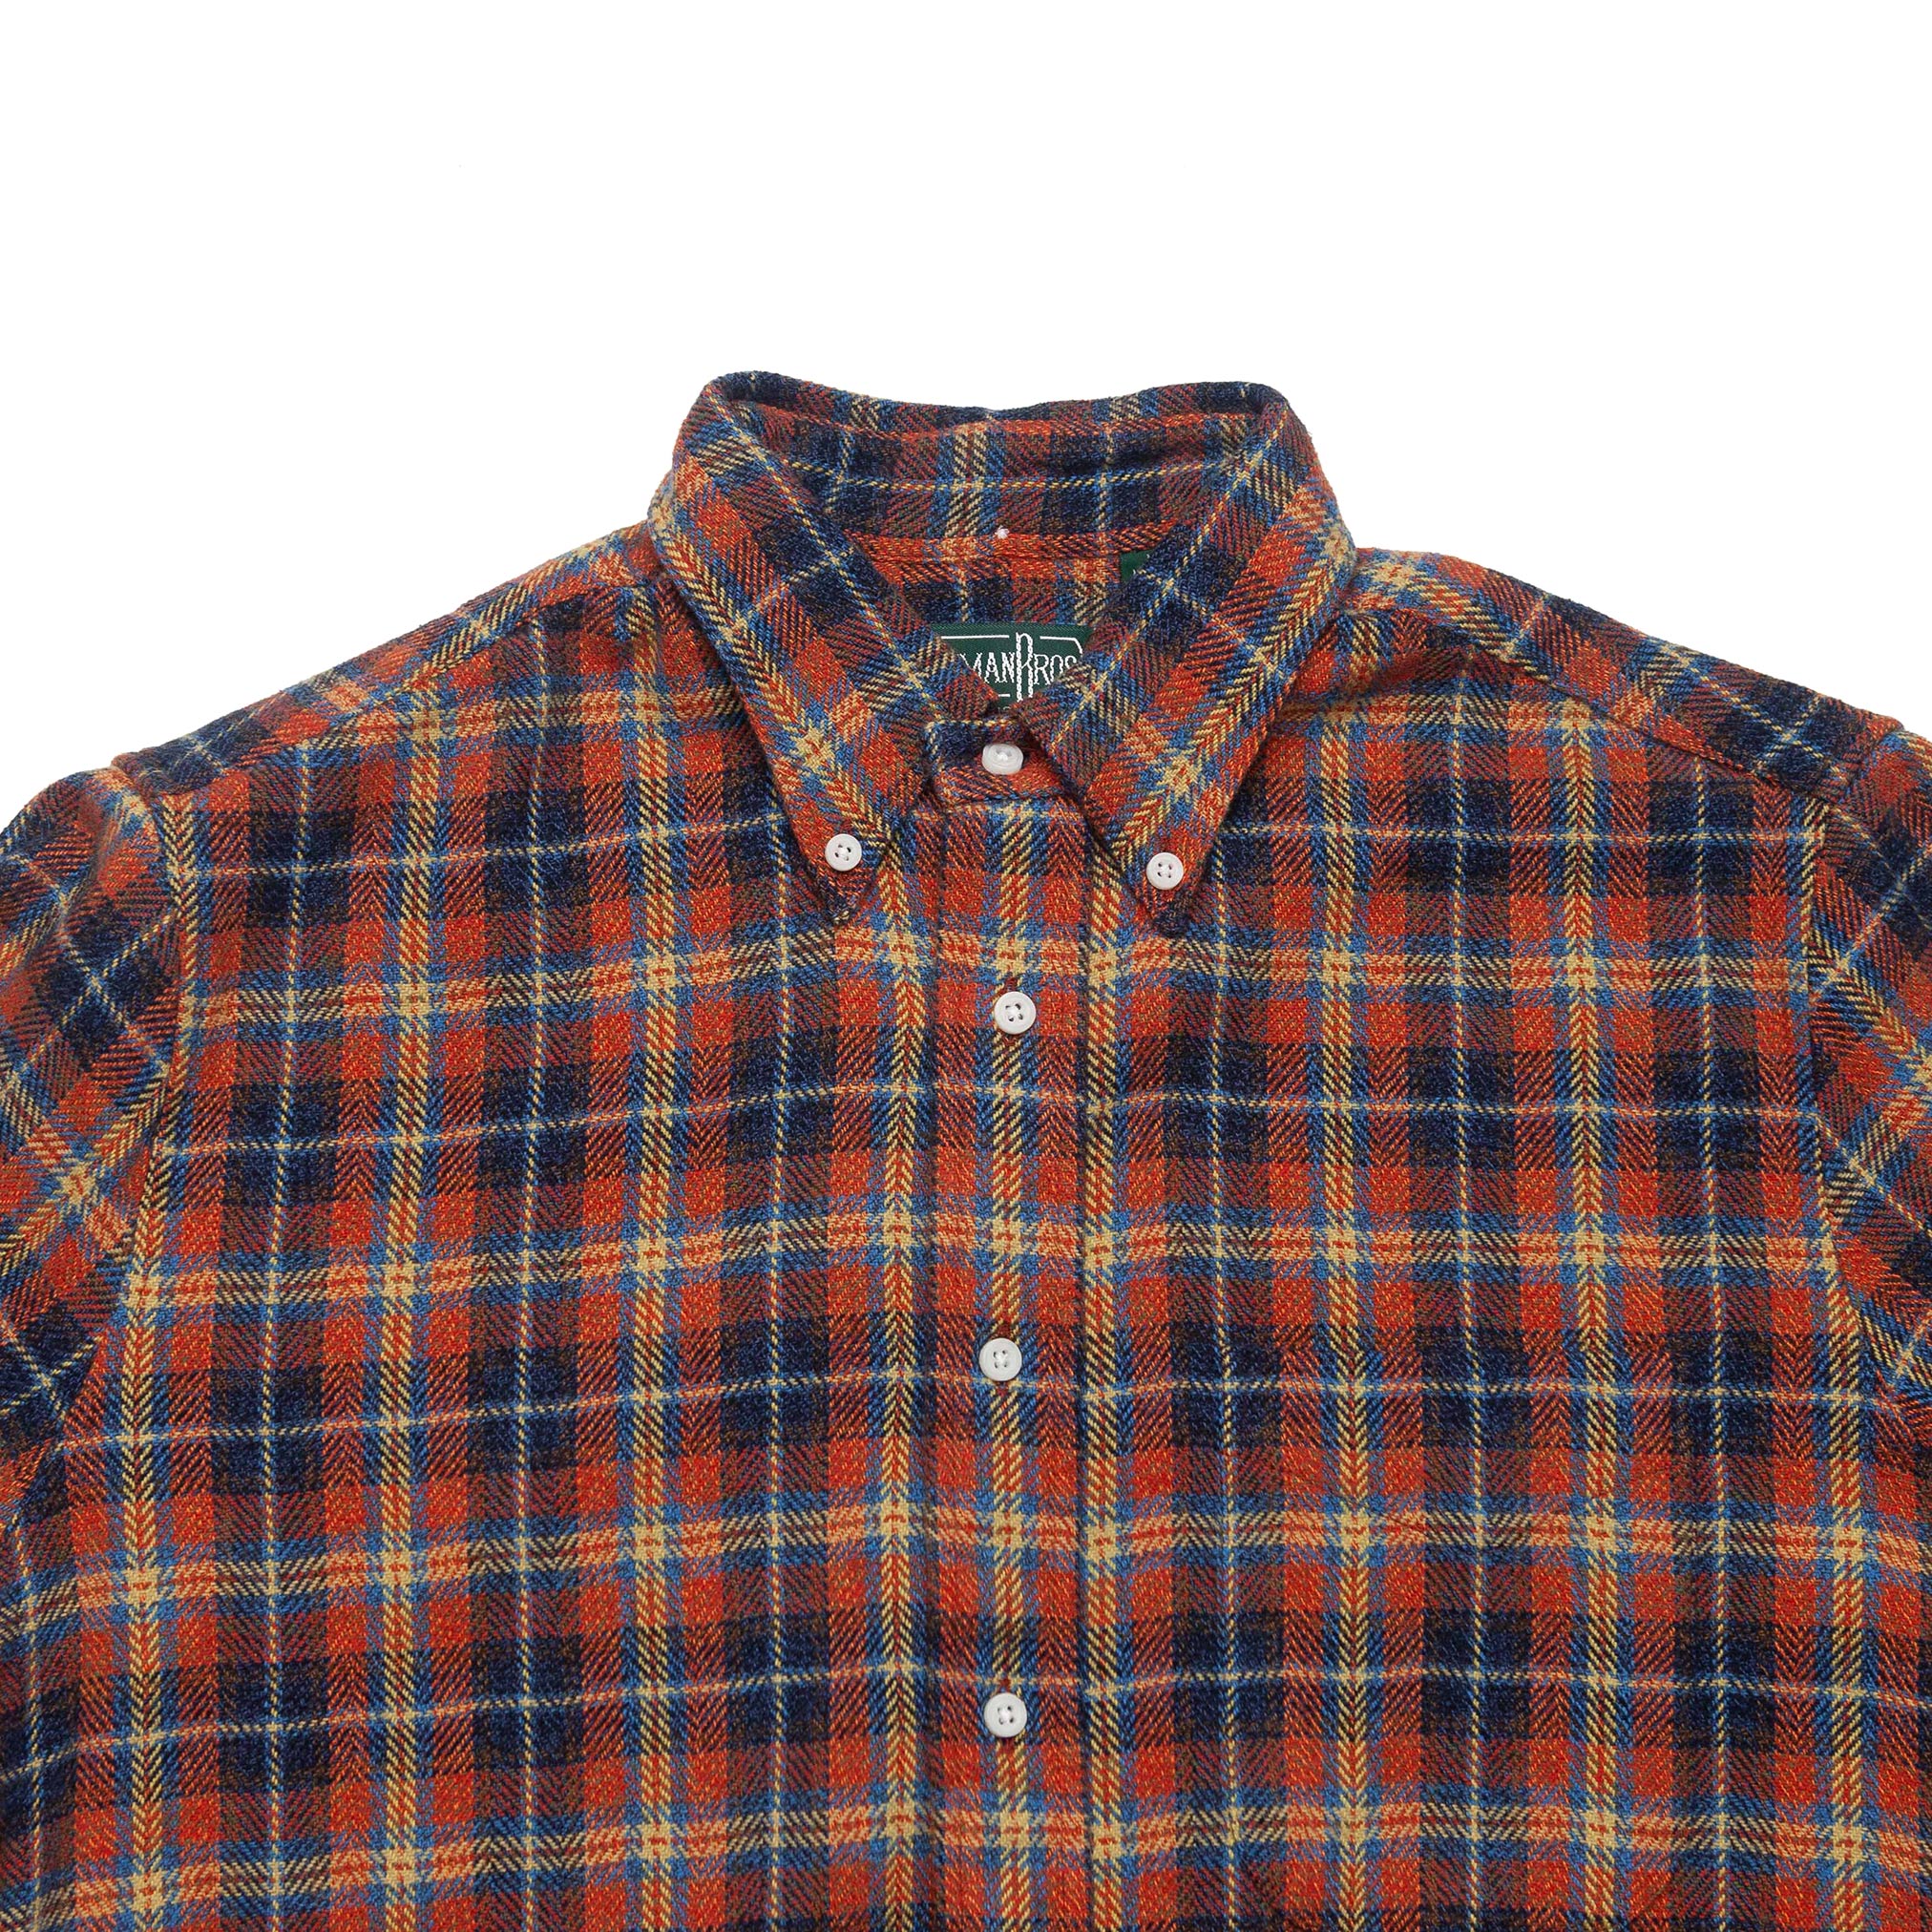 Red Cotton Tweed Check Shirt